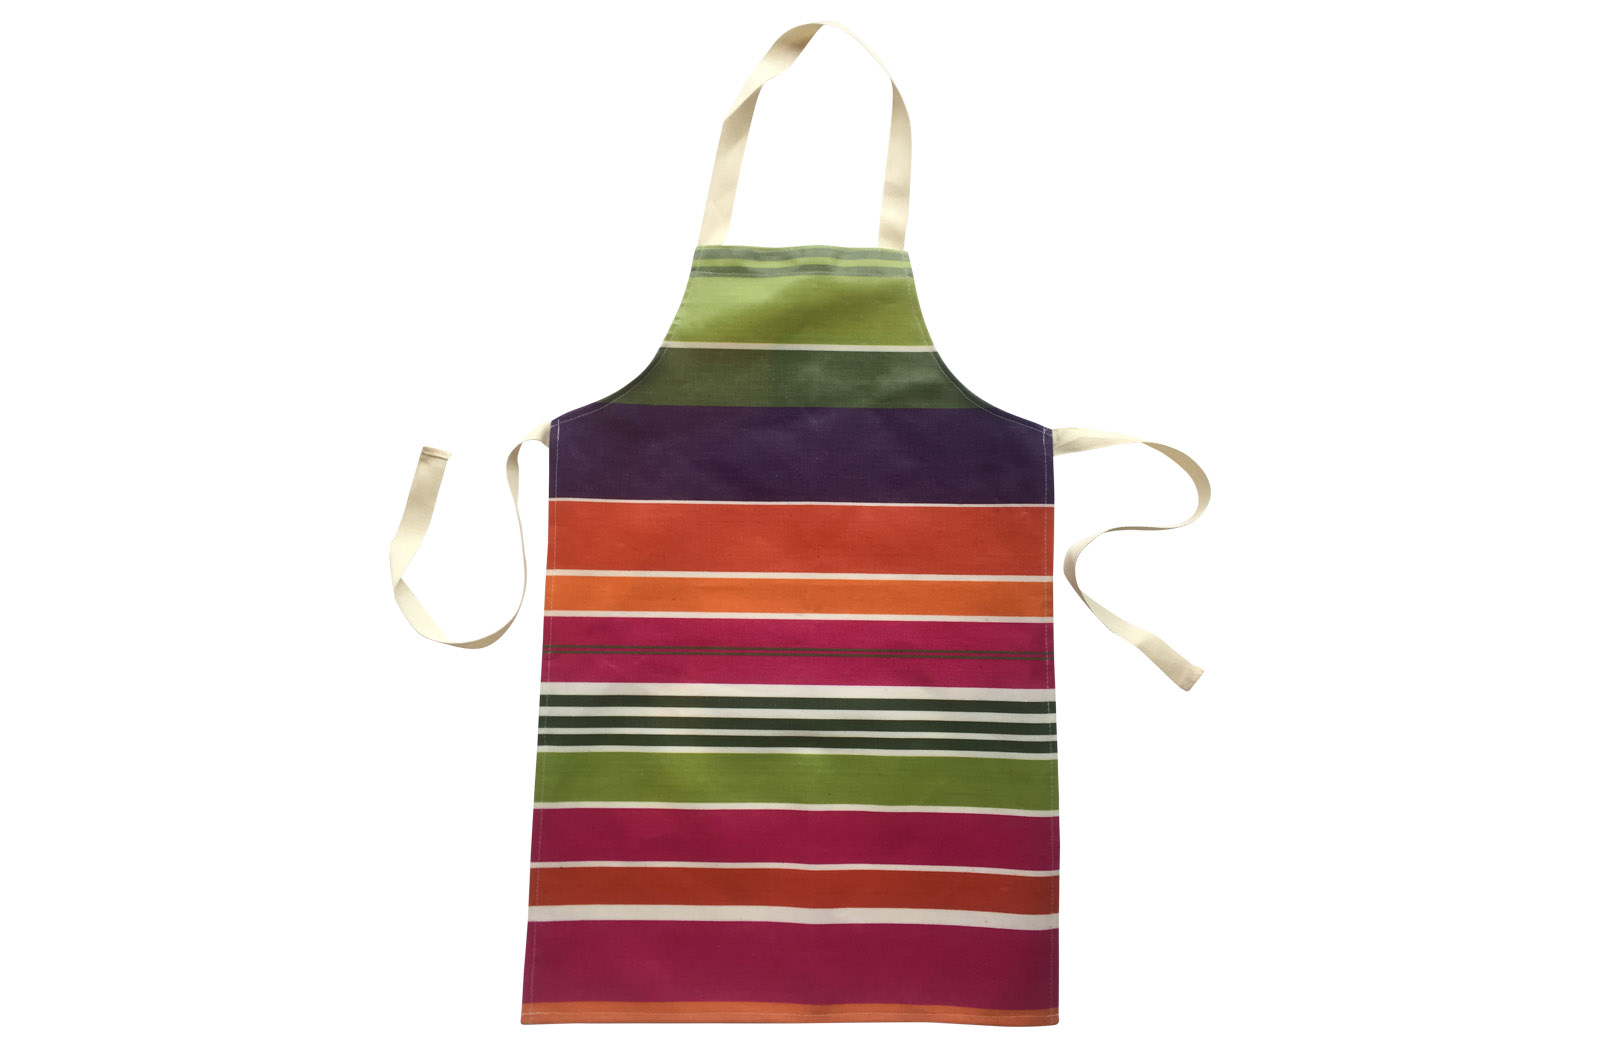 Wipe Clean PVC Apron for Children - bright pink, green, tangerine and purple stripes